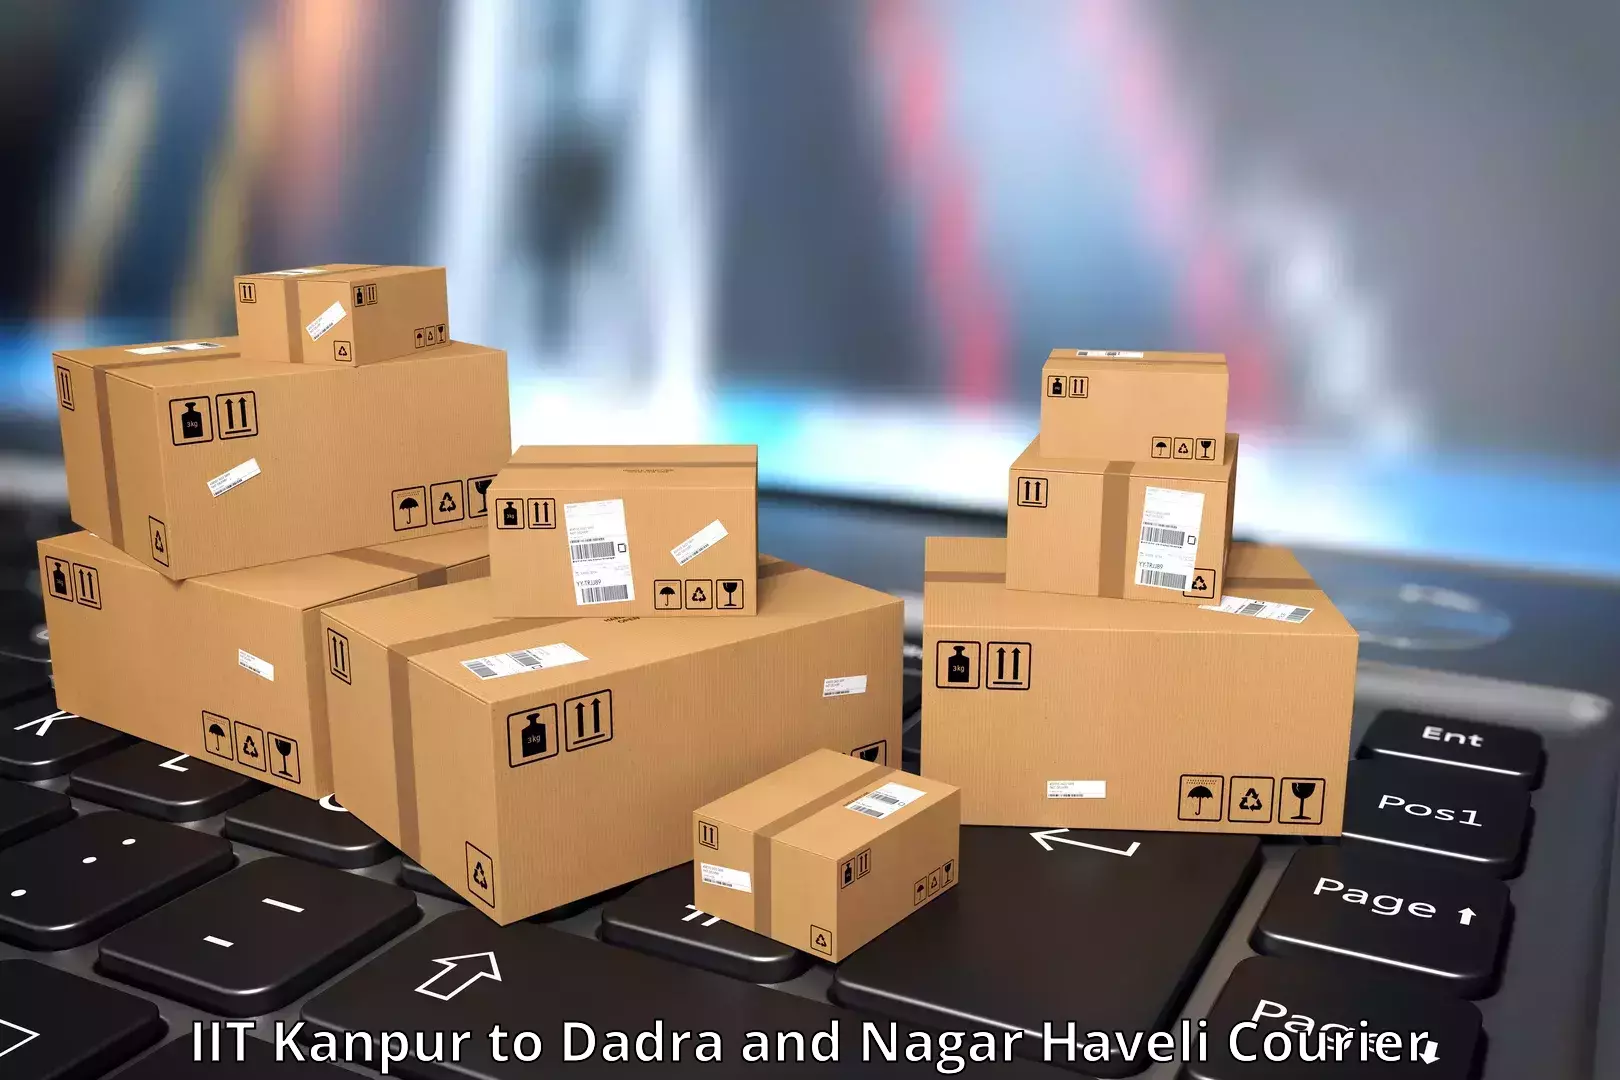 24-hour courier service IIT Kanpur to Dadra and Nagar Haveli